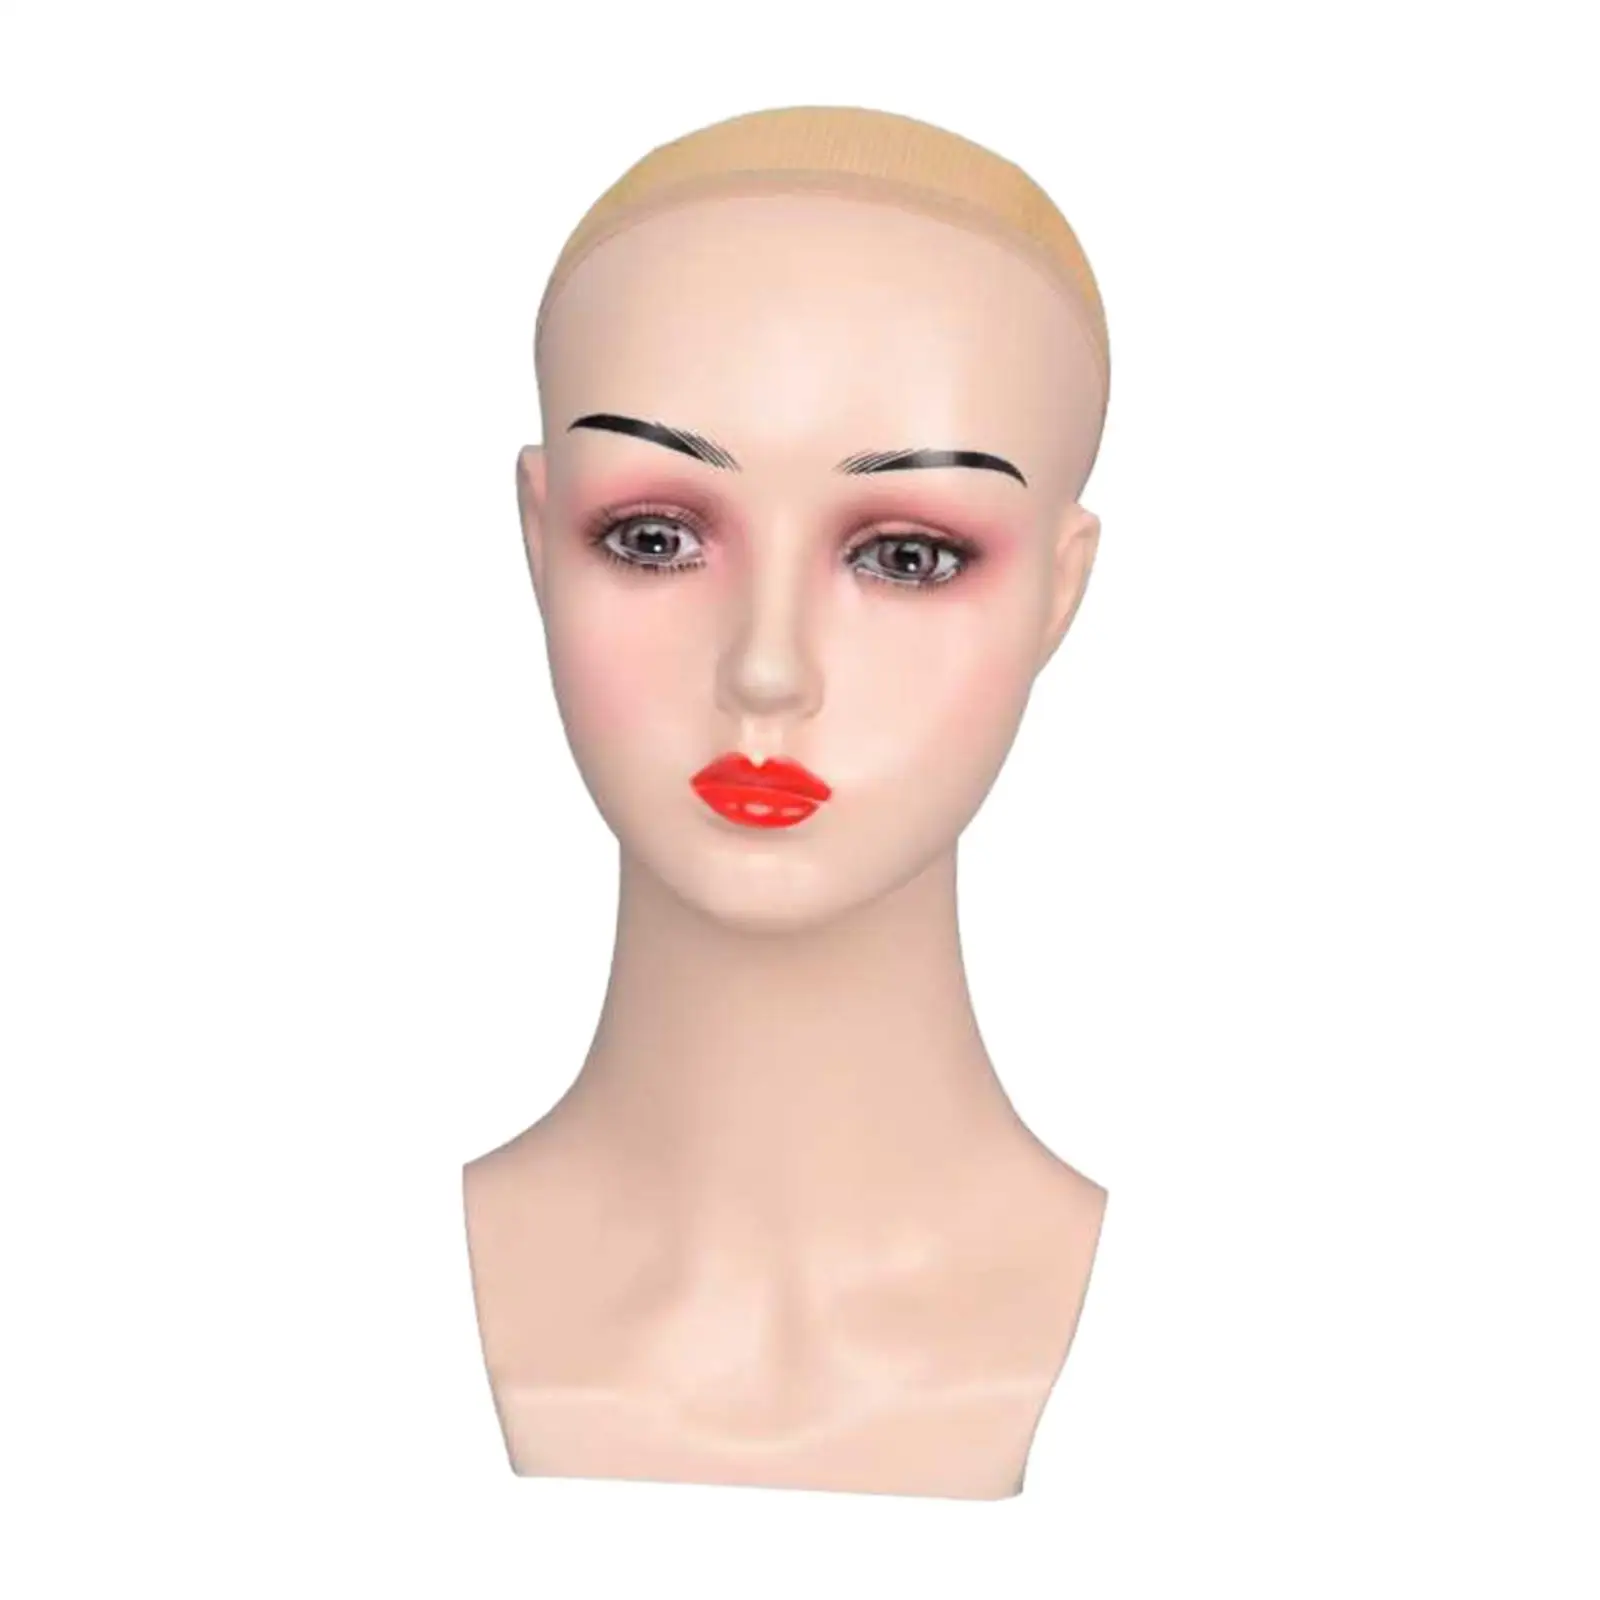 Female Mannequin Head Professional Durable Smooth Manikin Wig Head Stand for Wigs Making Styling Necklace Hats Glasses Jewelry